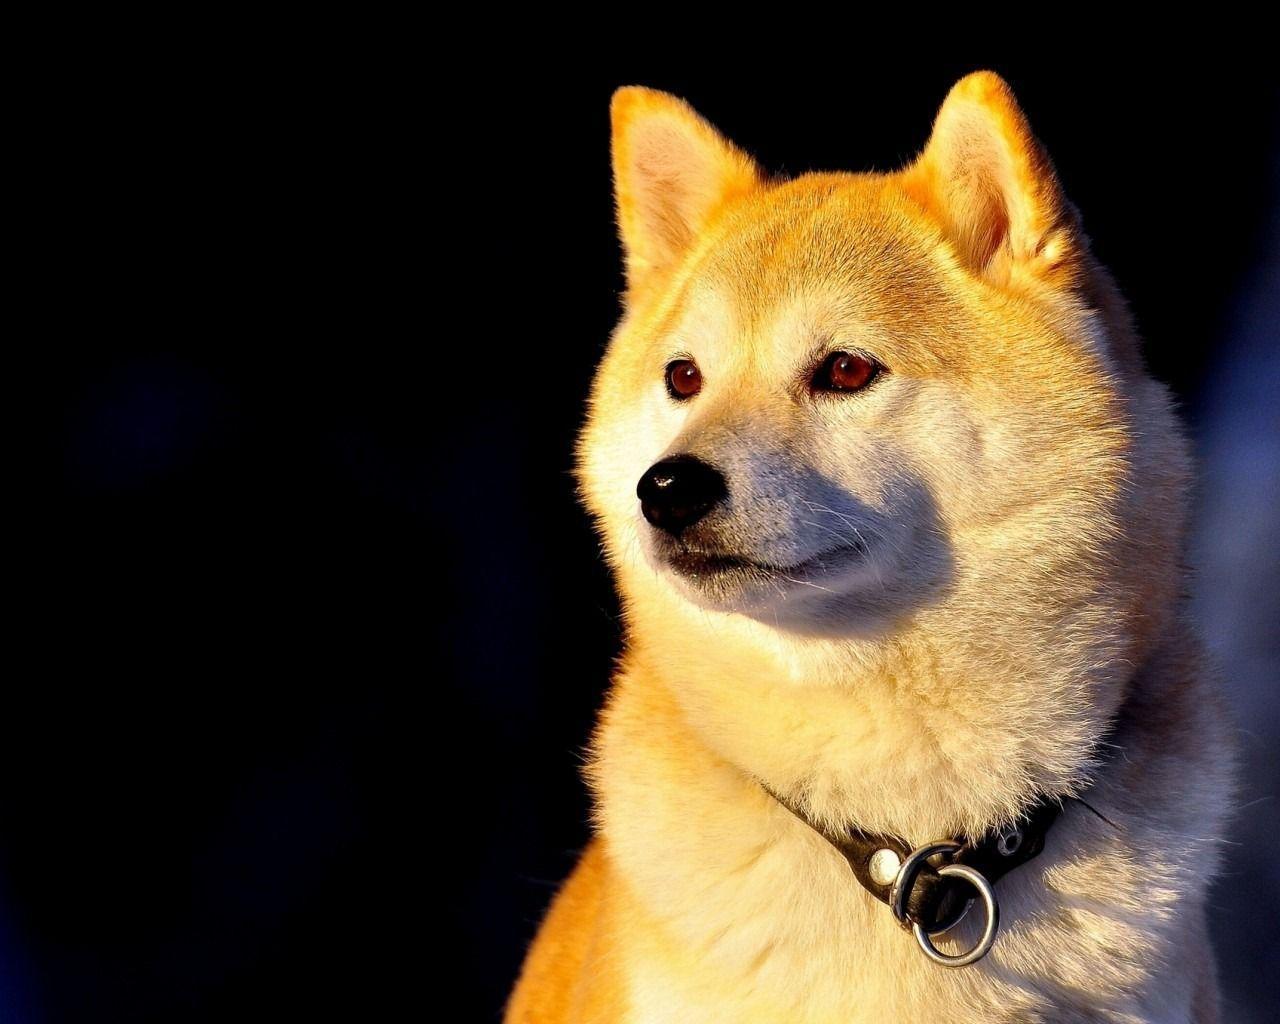 Gallery For Gt Doge Shibe Wallpaper